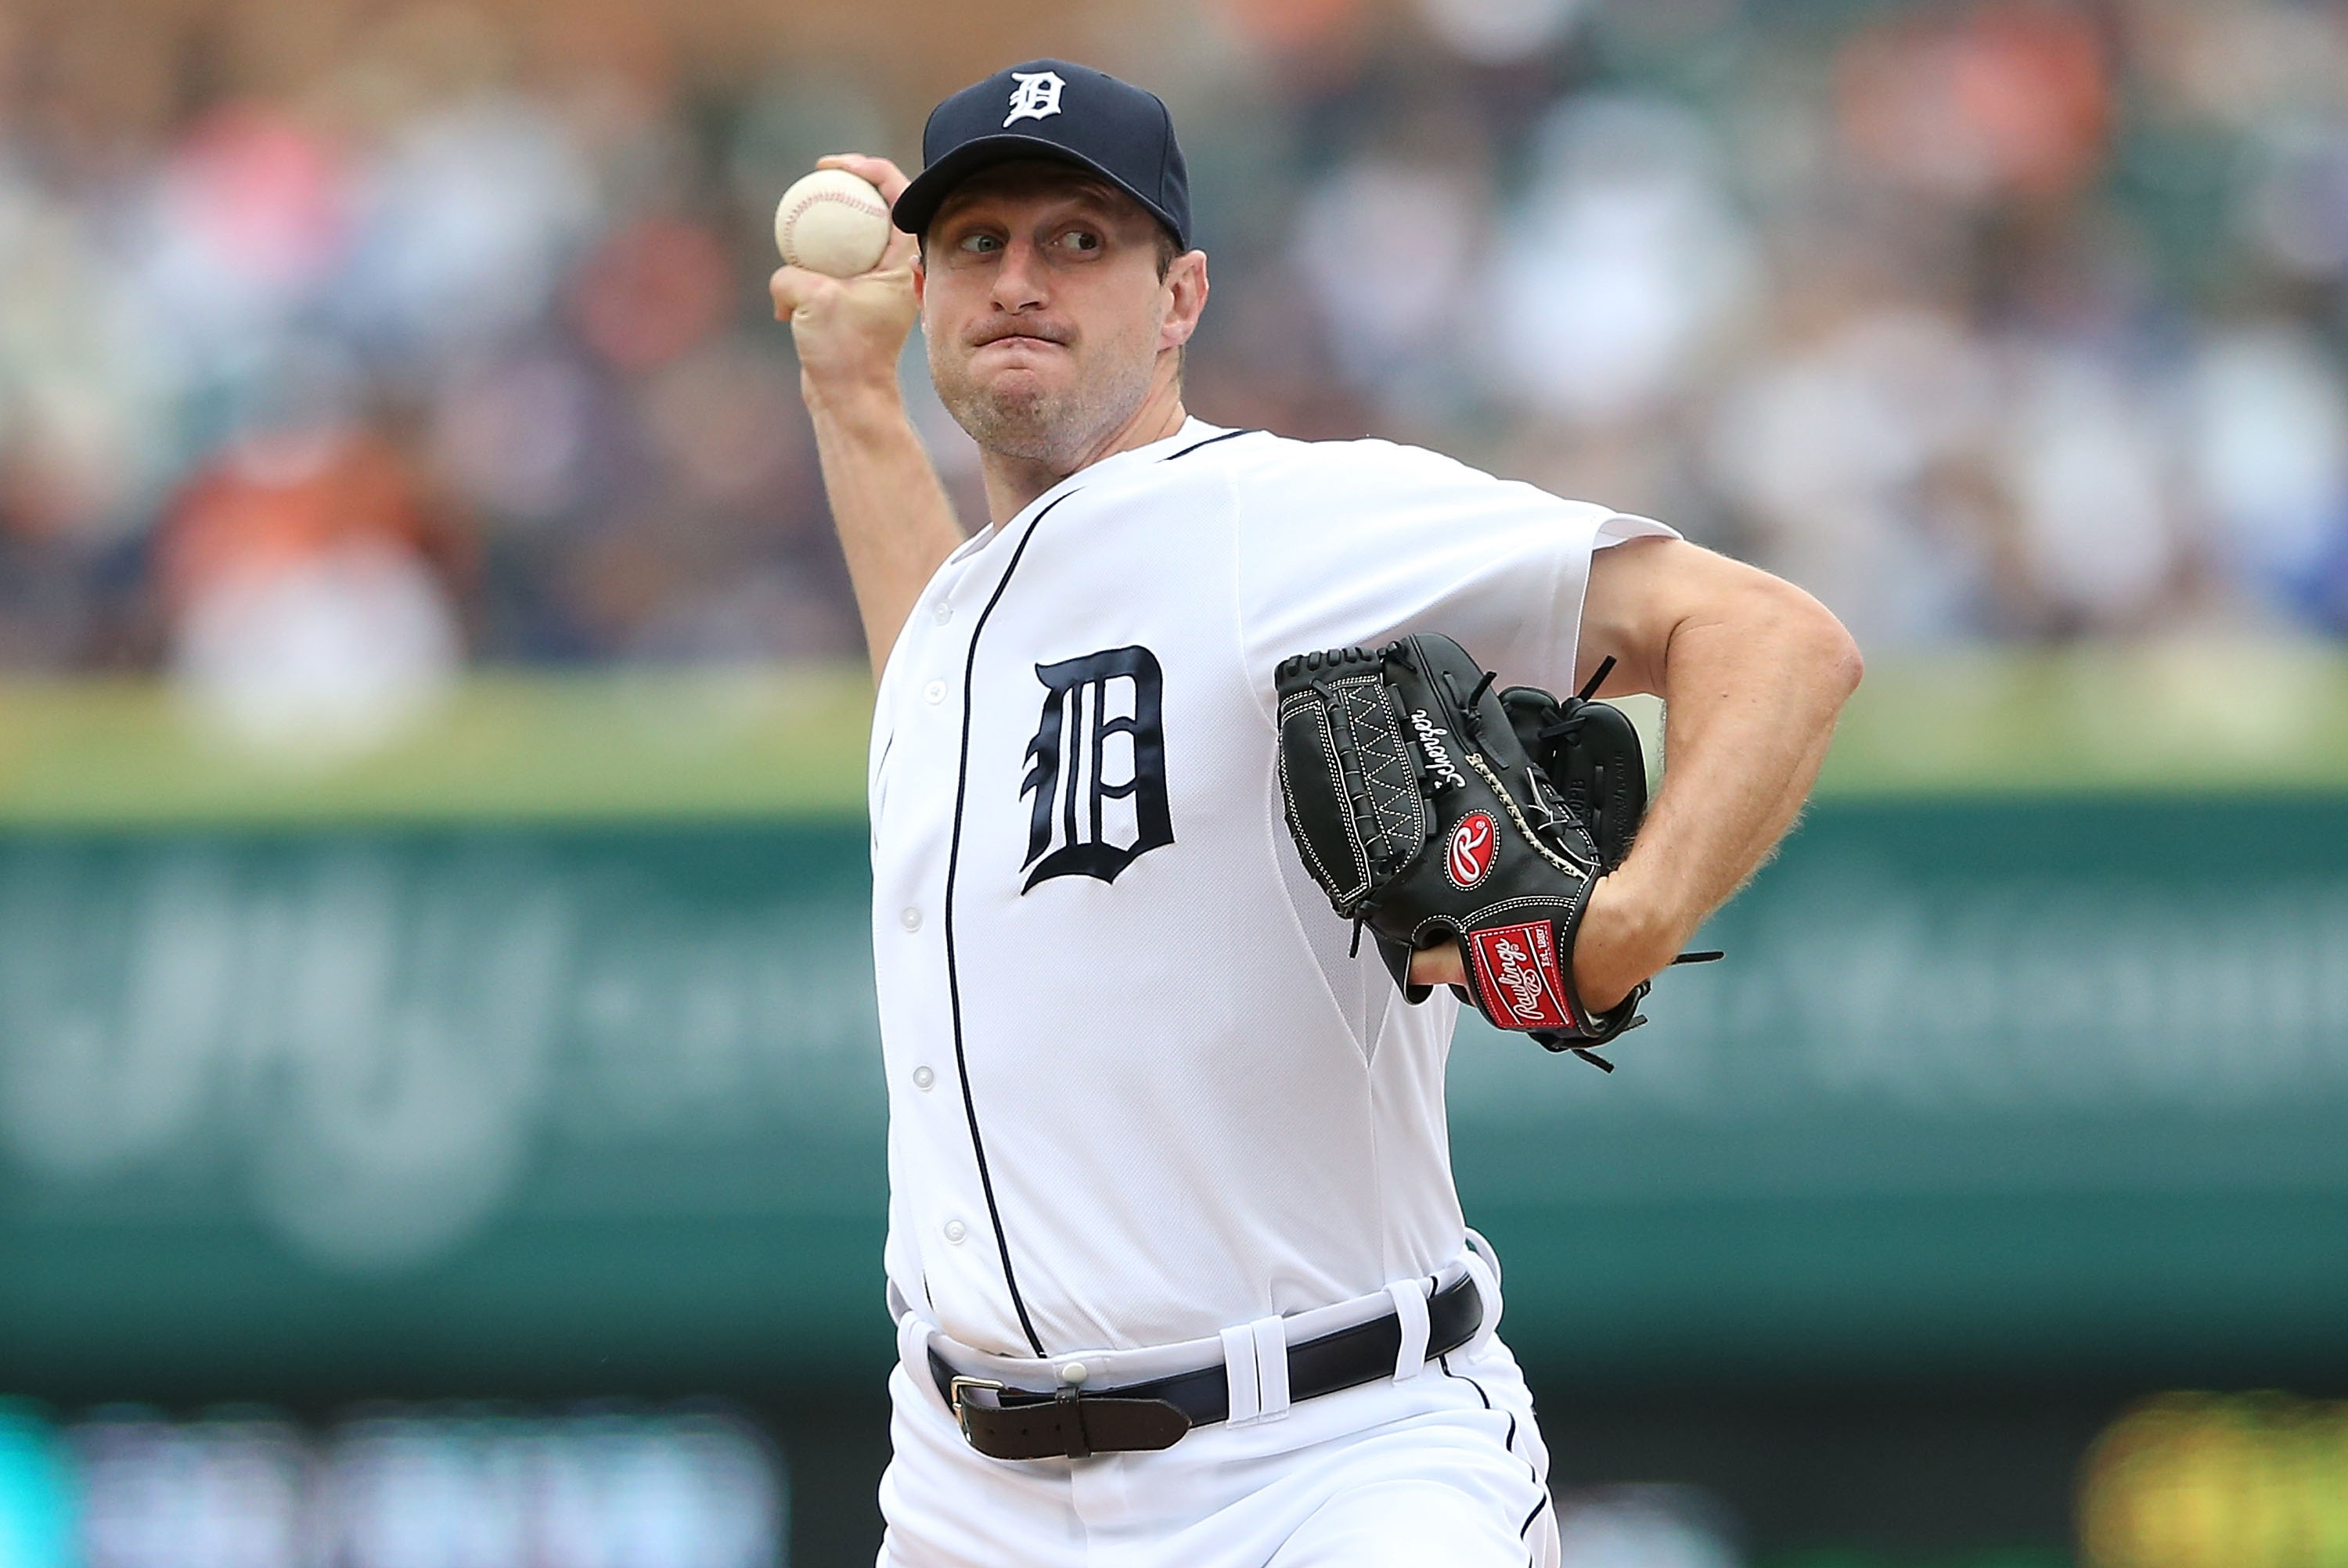 Scherzer still fond of Tigers but has moved on